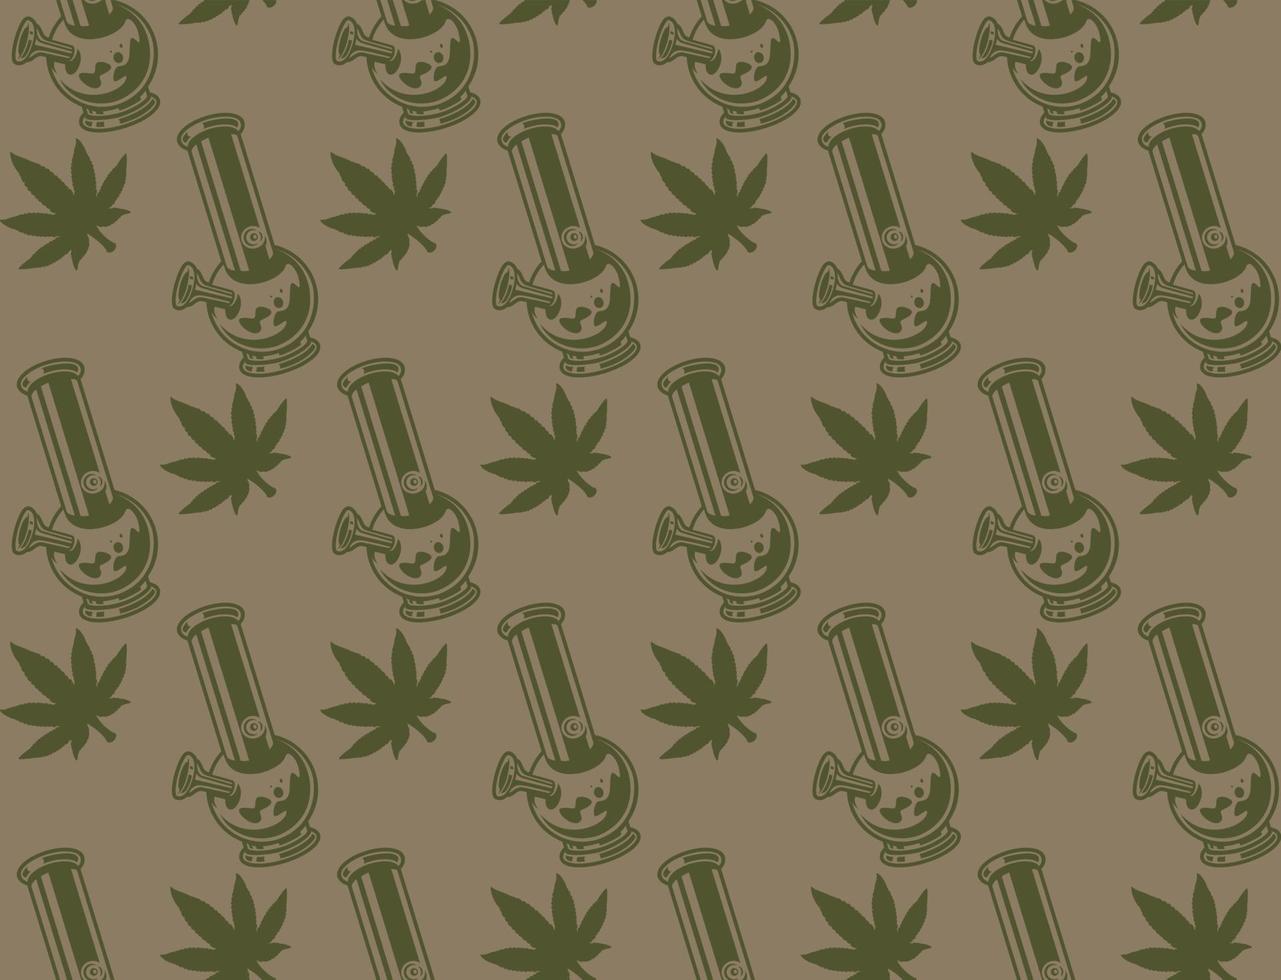 Vintage seamless pattern with a cannabis leaf vector